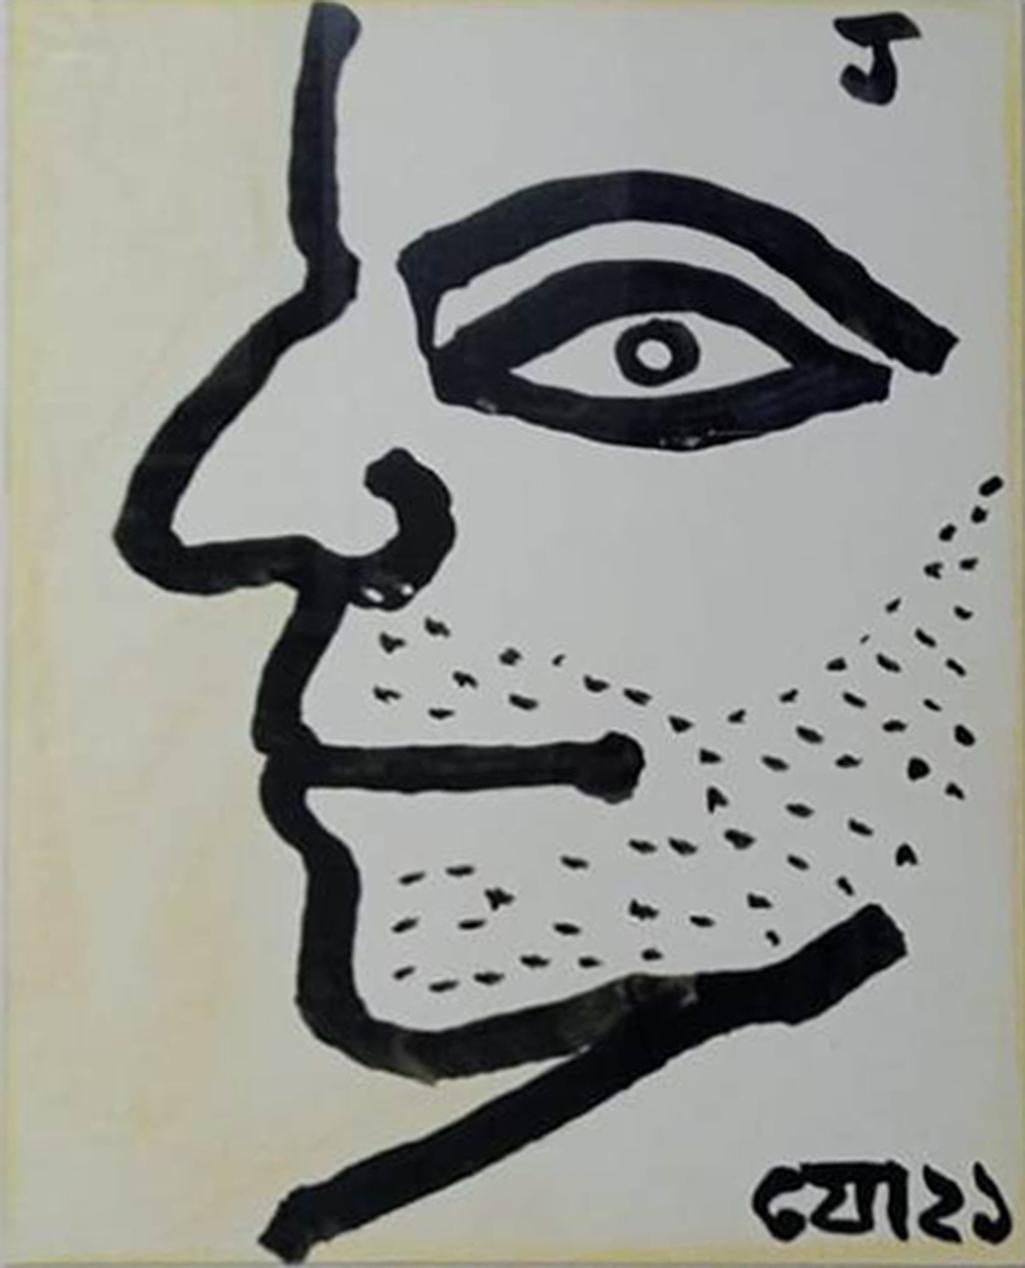 Face, Black & White Ink & Pastel on Paper by Modern Indian Artist 